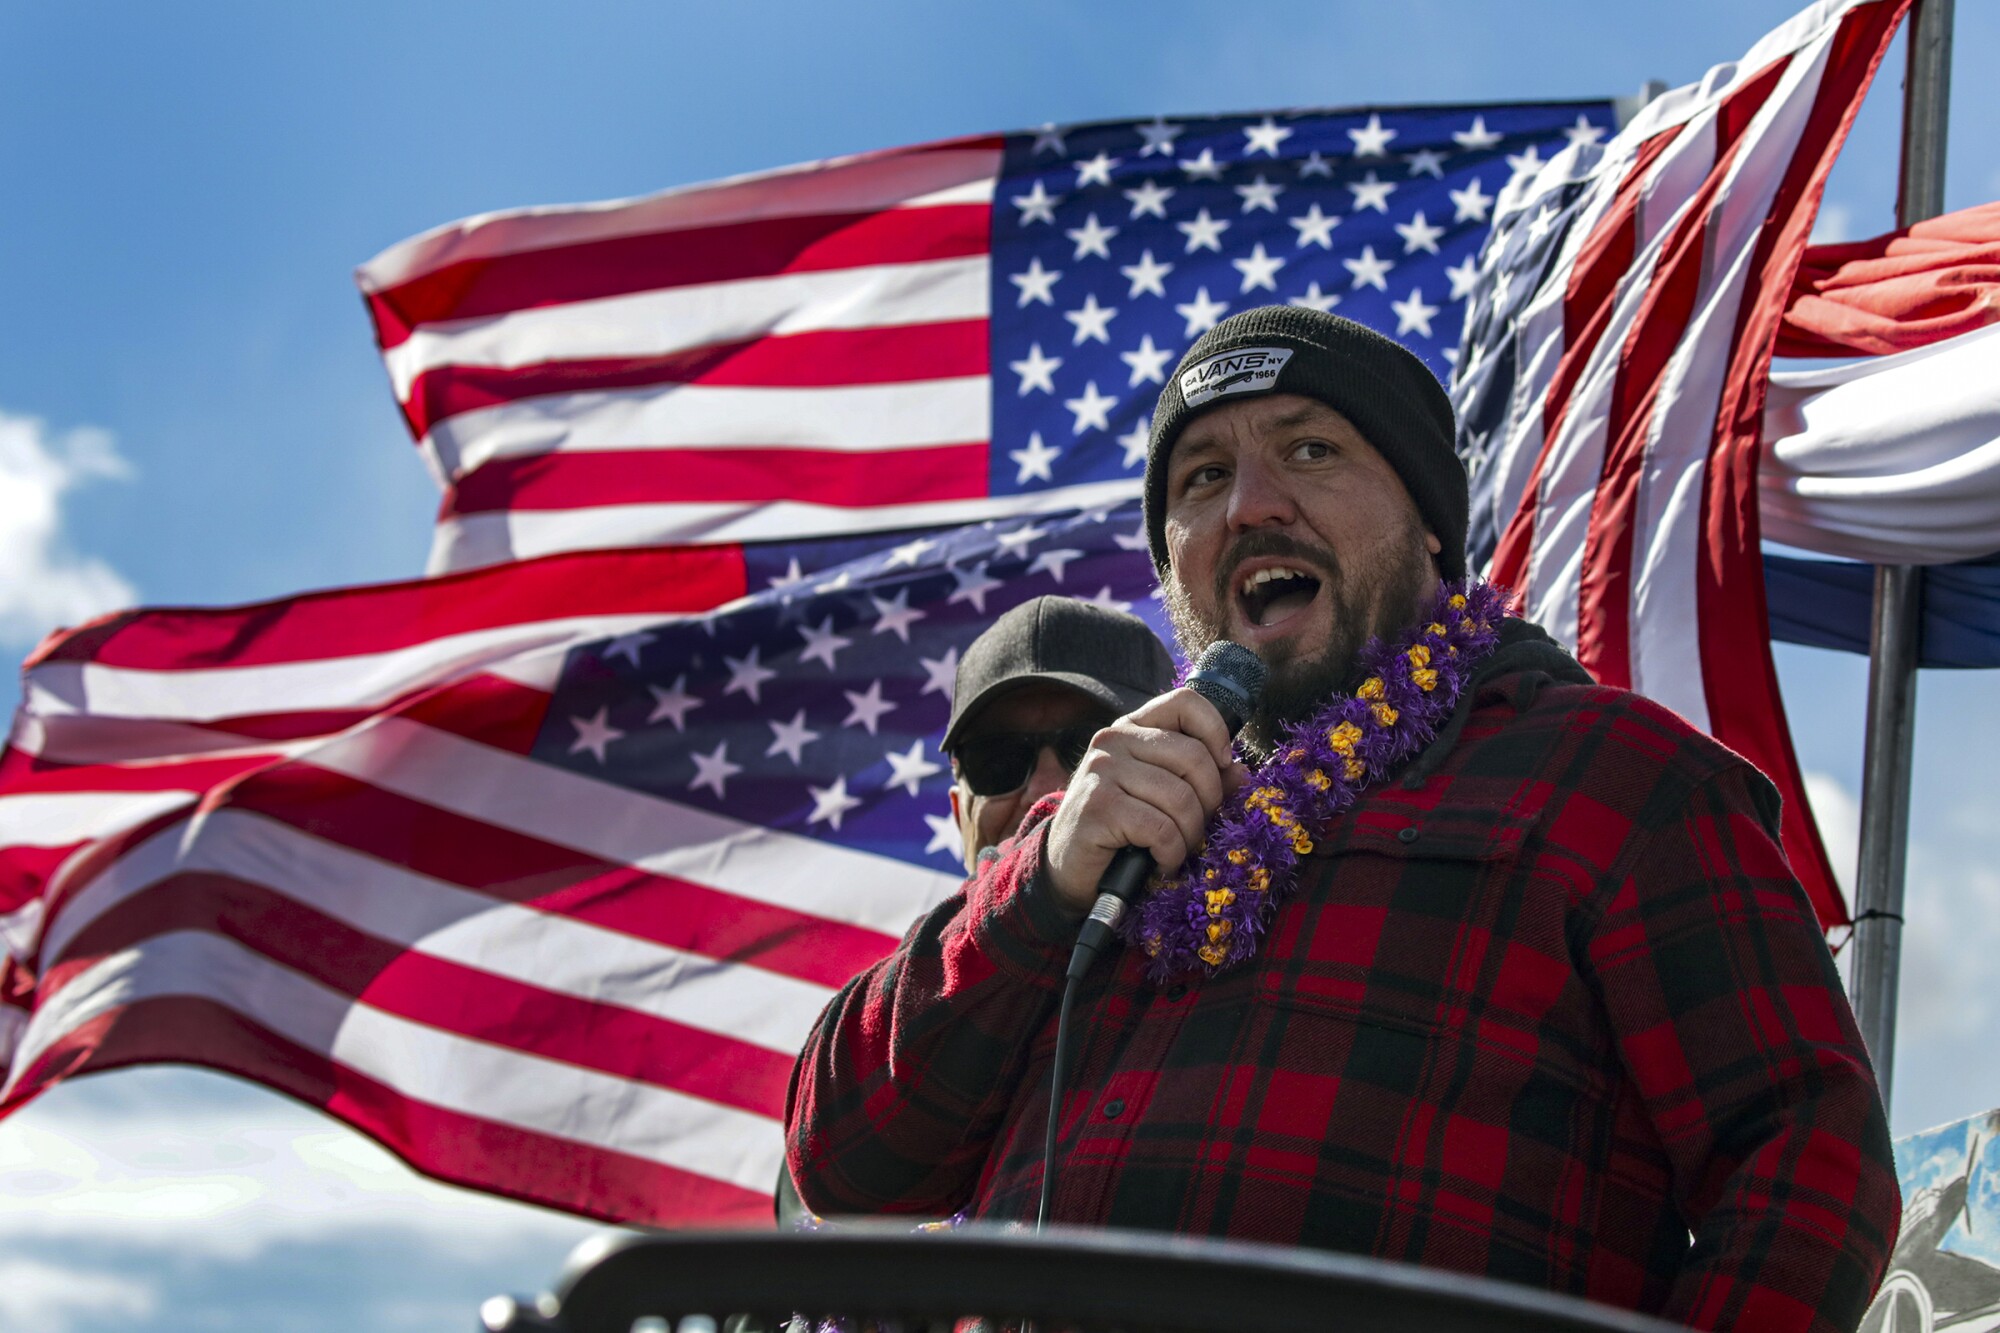 Trucker Brian Brase speaks at a rally, with American flags behind him